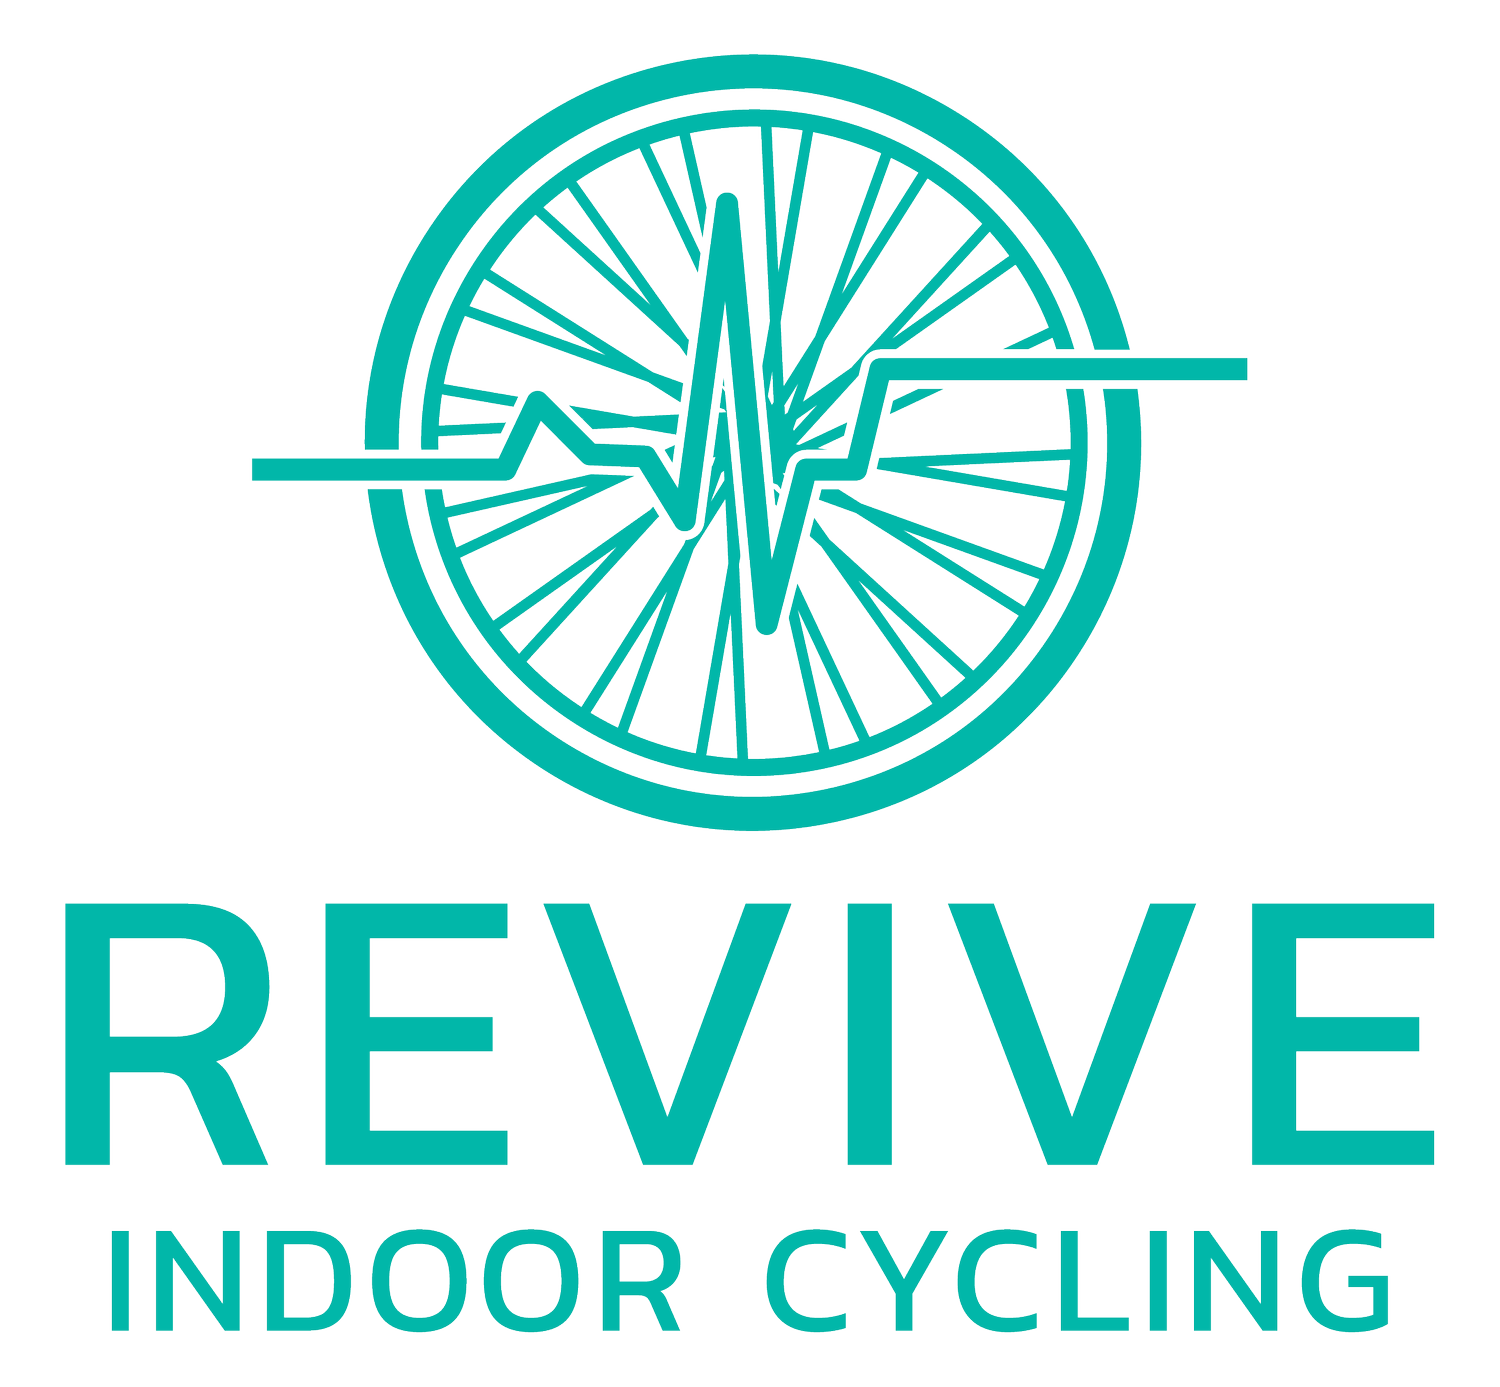 Revive Indoor Cycling